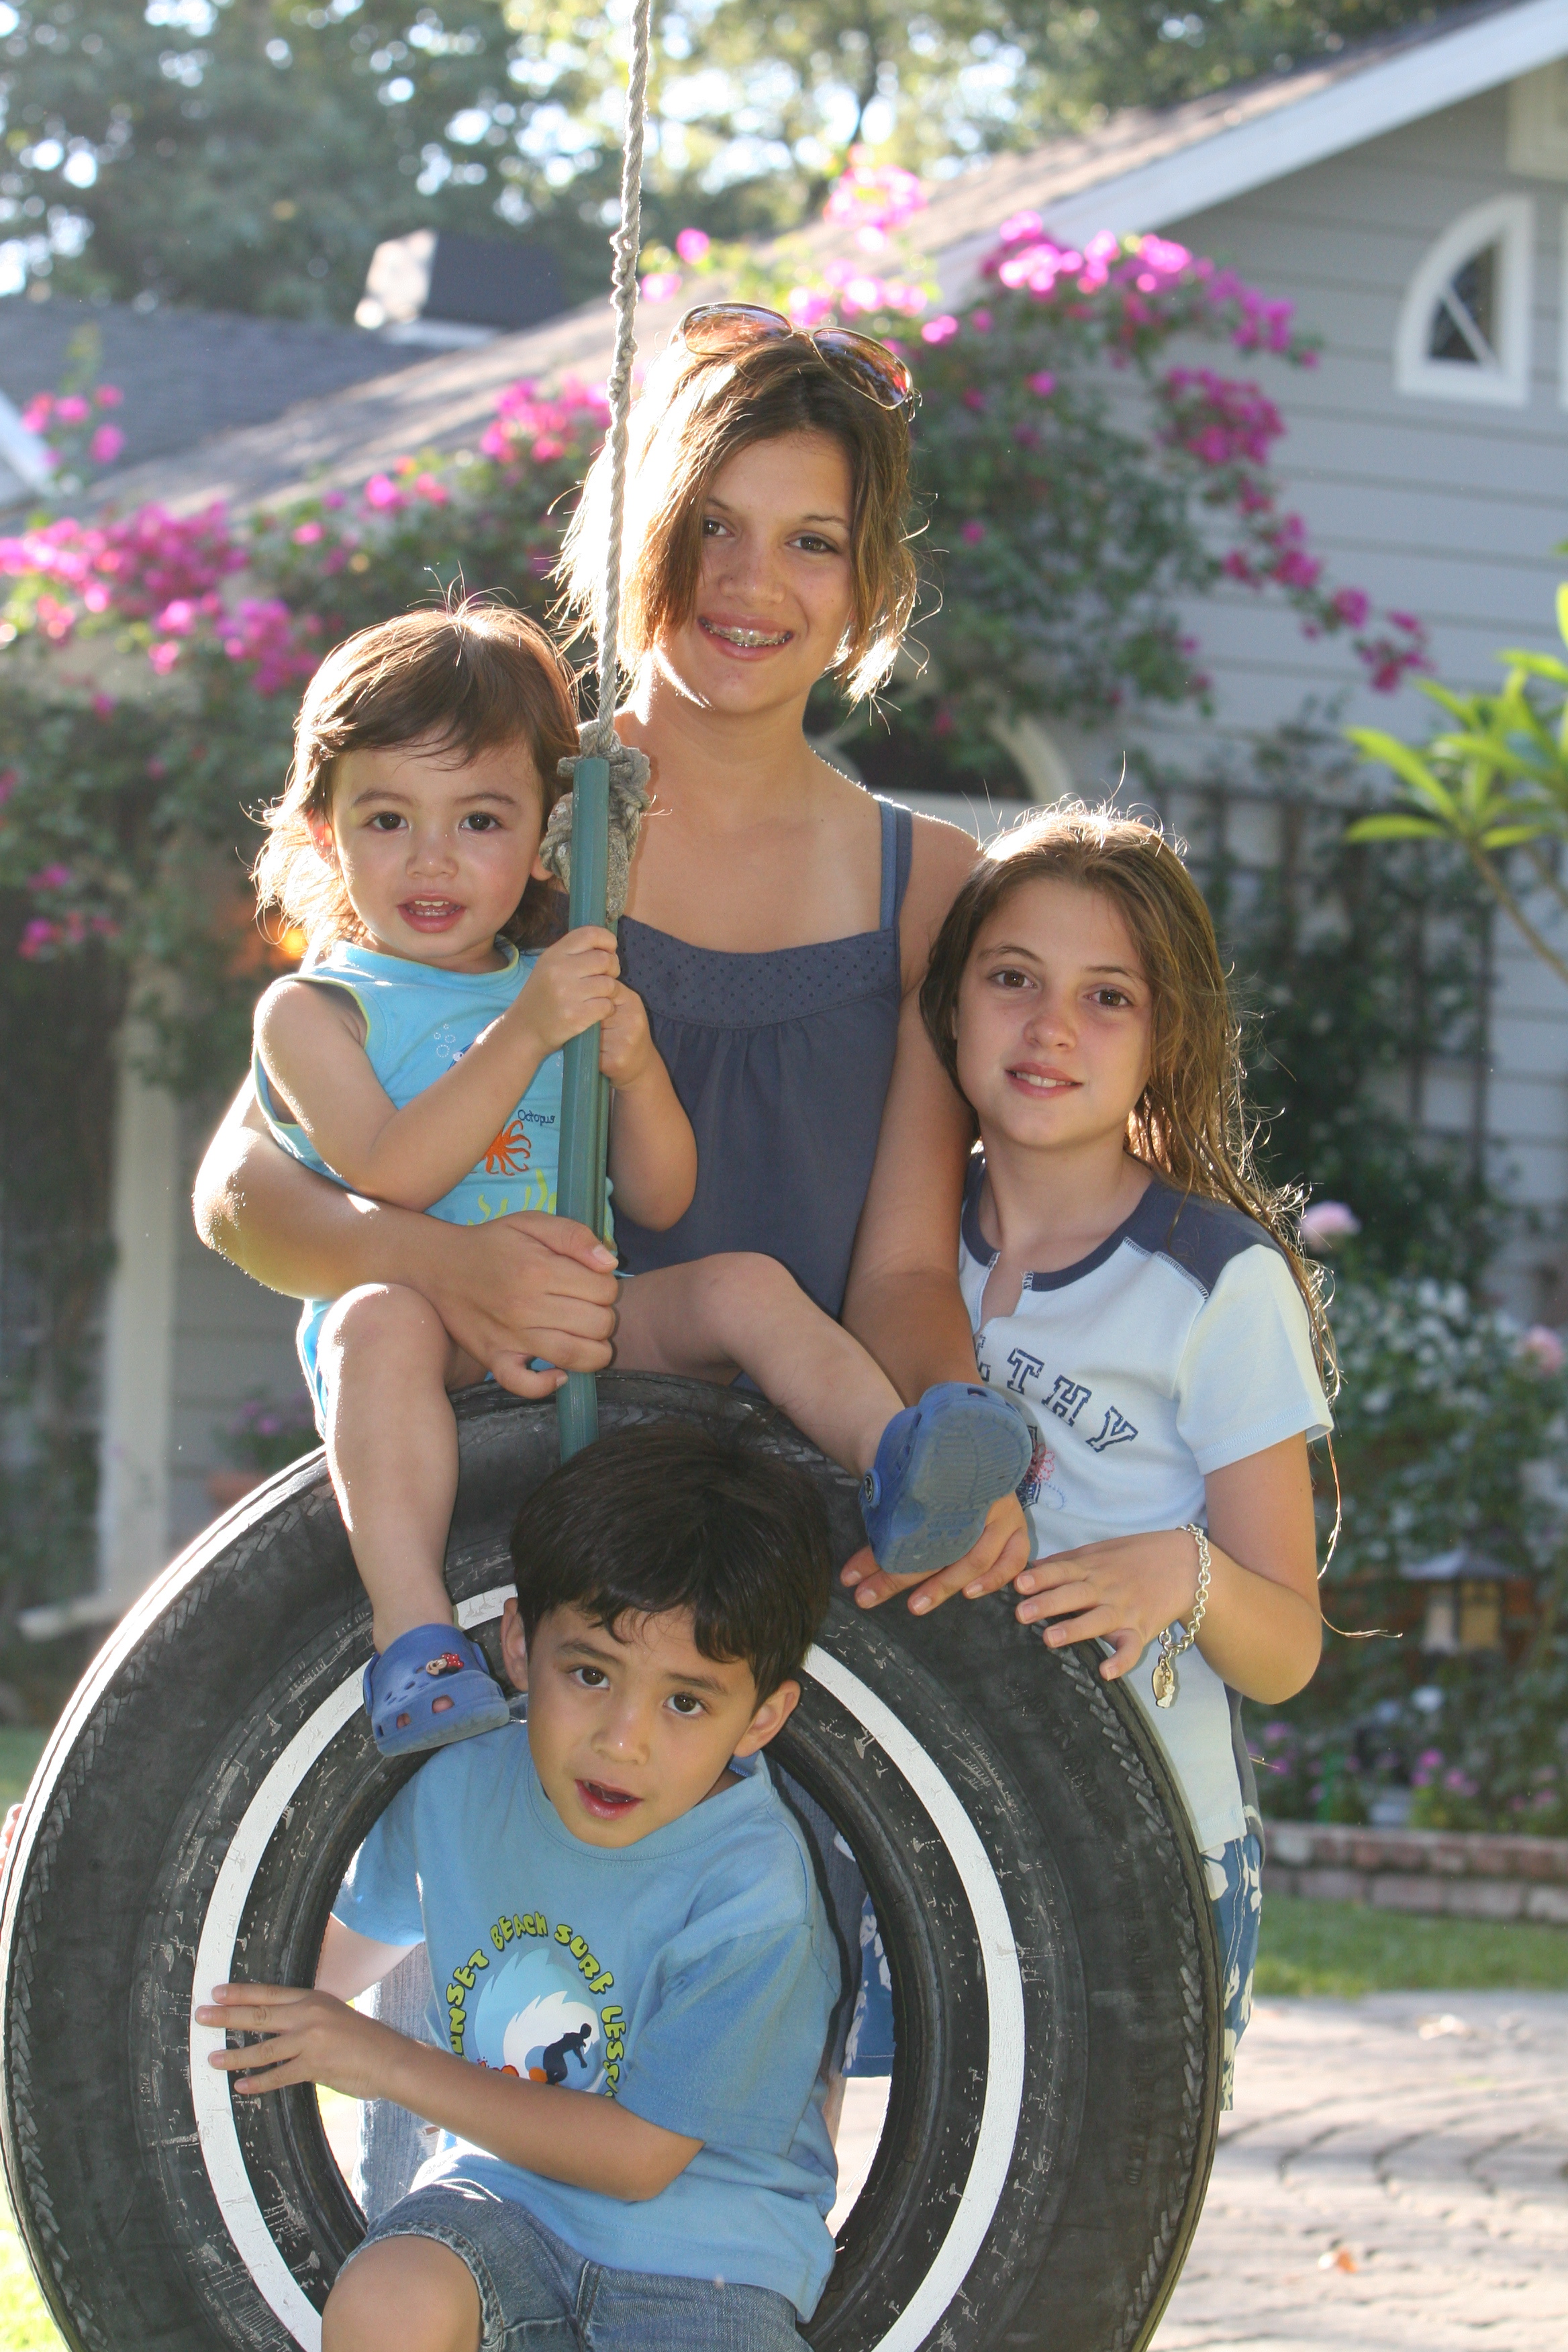 Stefan's 4 children. Odin (left), Brittany(center), Kaila(right) and Gunnar (bottom of frame in the tire)